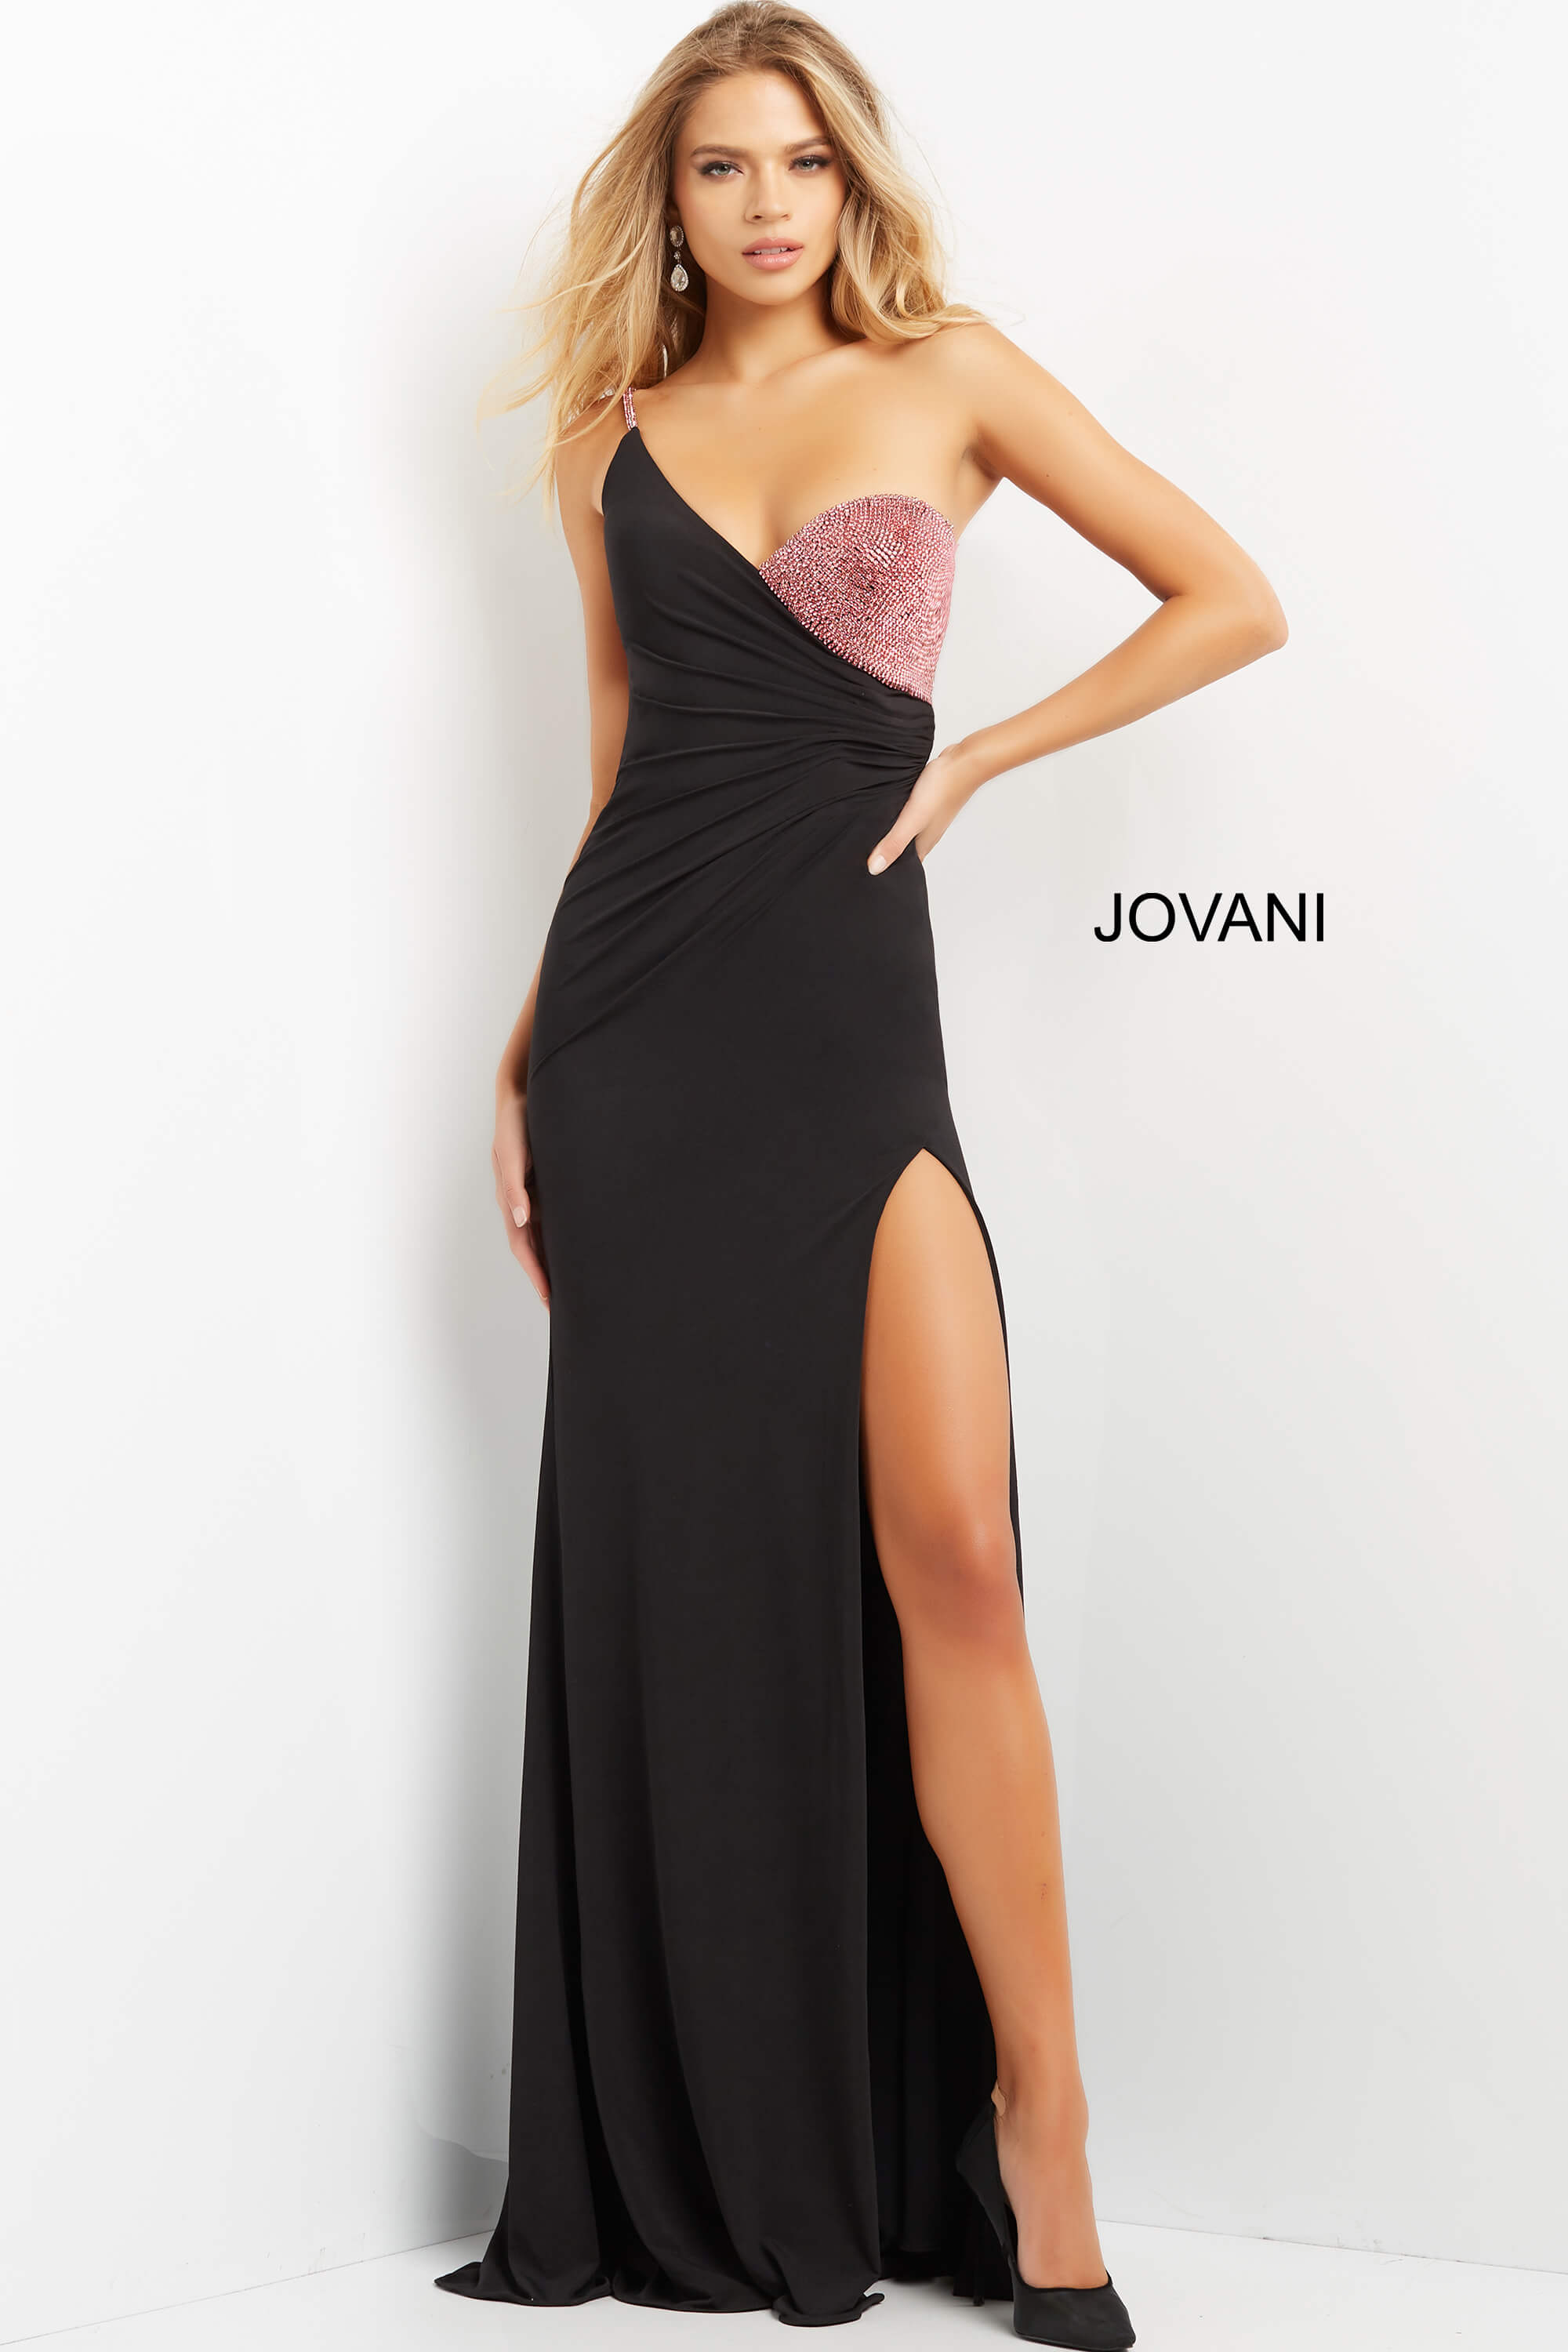 Embellished Bust Fitted Evening Dress By Jovani -09021